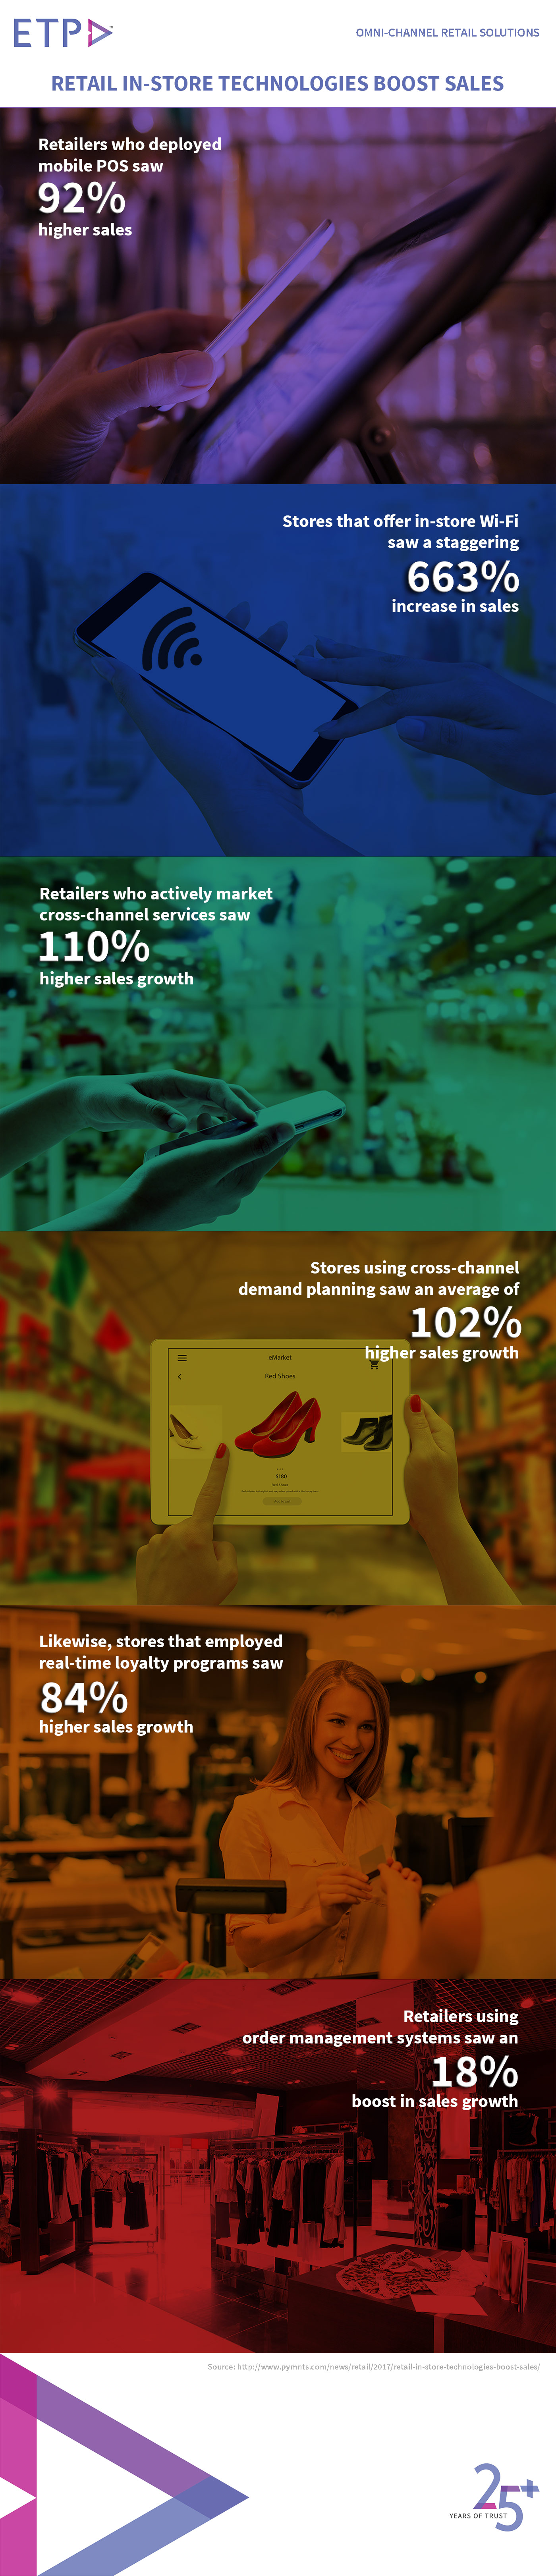 ETP Blog Infographic Retail-In-Store-Technologies-Boost-Sales